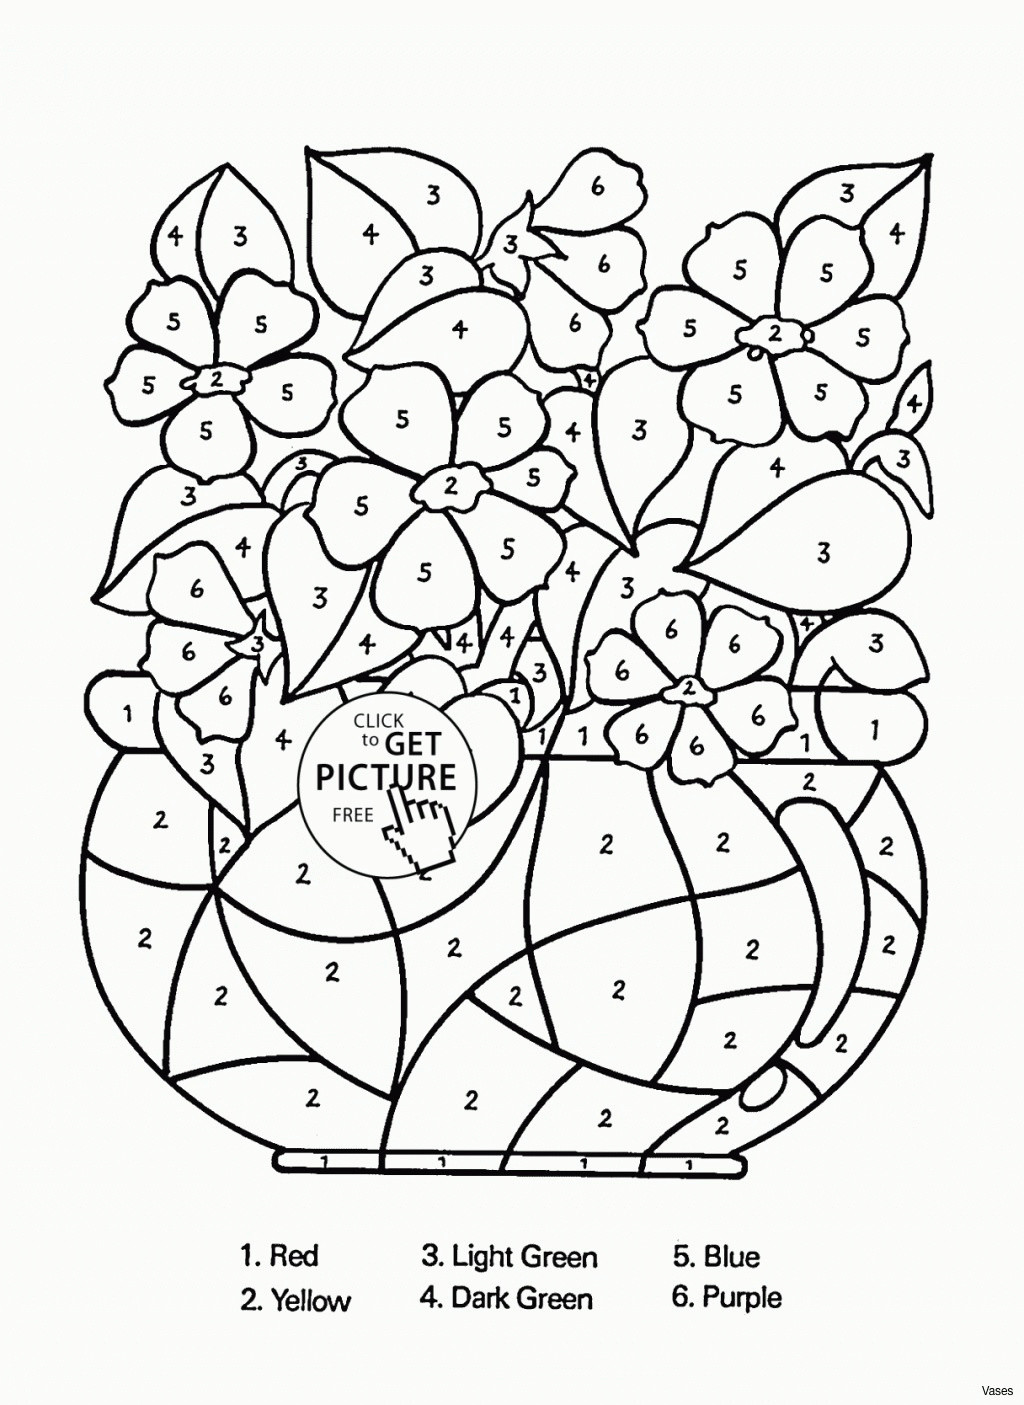 15 Stylish Small Square Flower Vase 2024 free download small square flower vase of 5 elegant unique flower vases pics best roses flower inside awesome flowers coloring pages new cool vases flower vase coloring page of 5 elegant unique flower